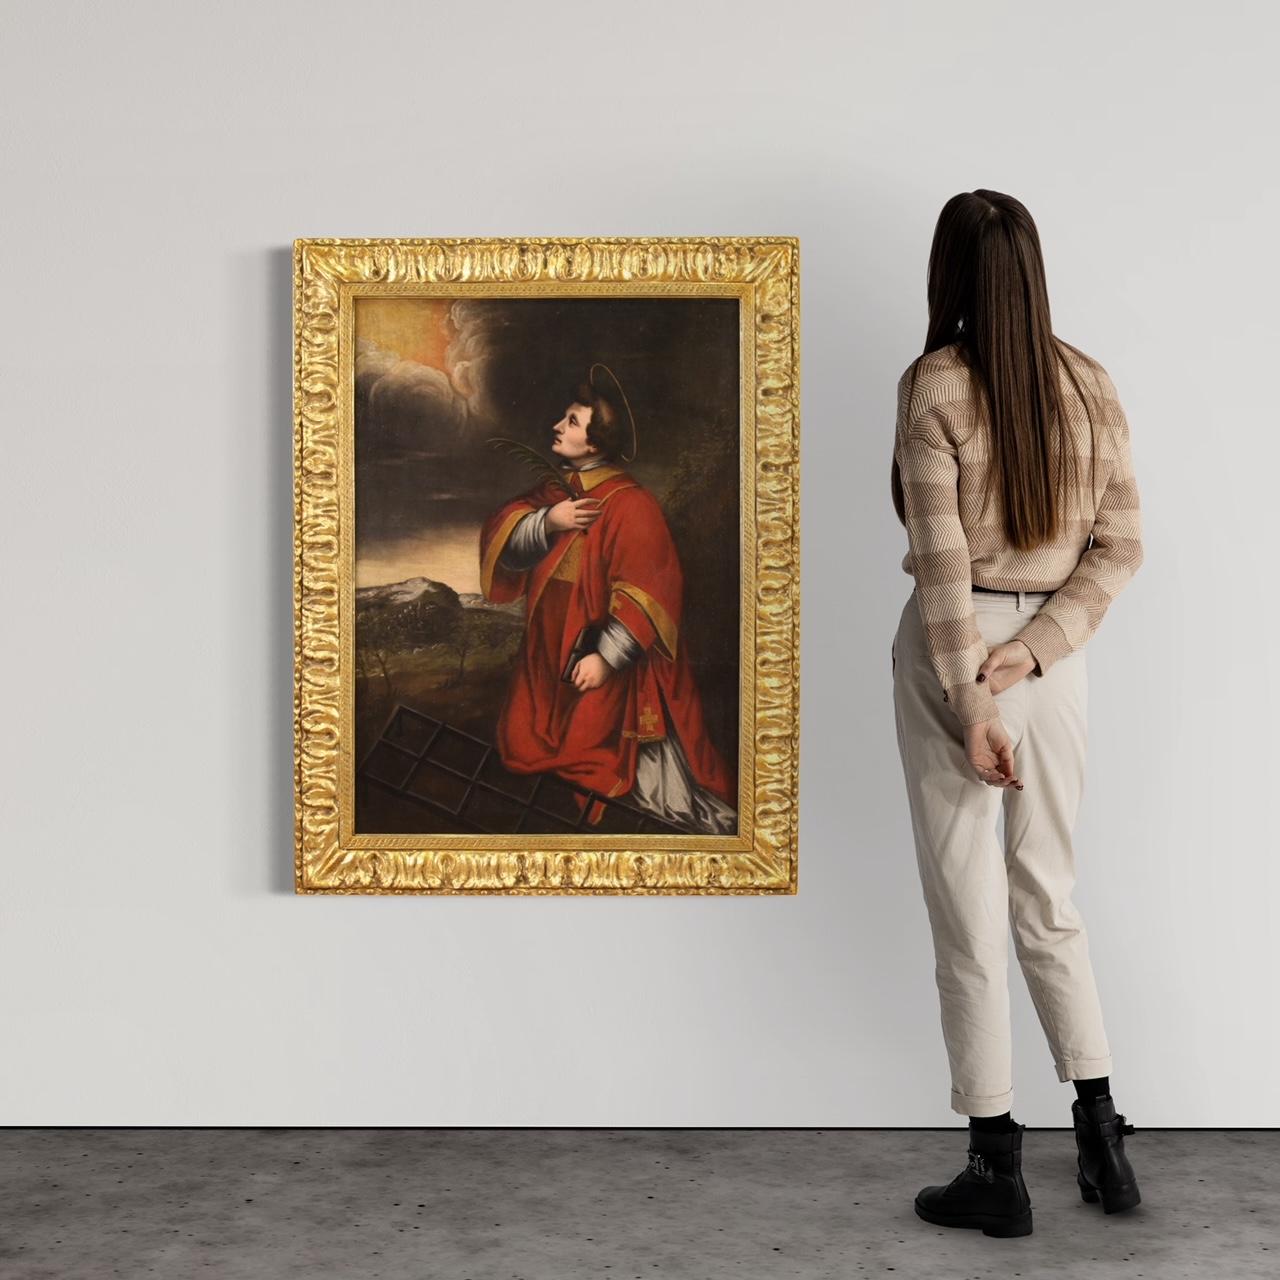 Antique Italian painting from the 17th century. Artwork oil on canvas depicting a religious subject Saint Lawrence of good pictorial quality. Large size and impact painting adorned with a 20th century frame in wood and plaster, carved and gilded, of